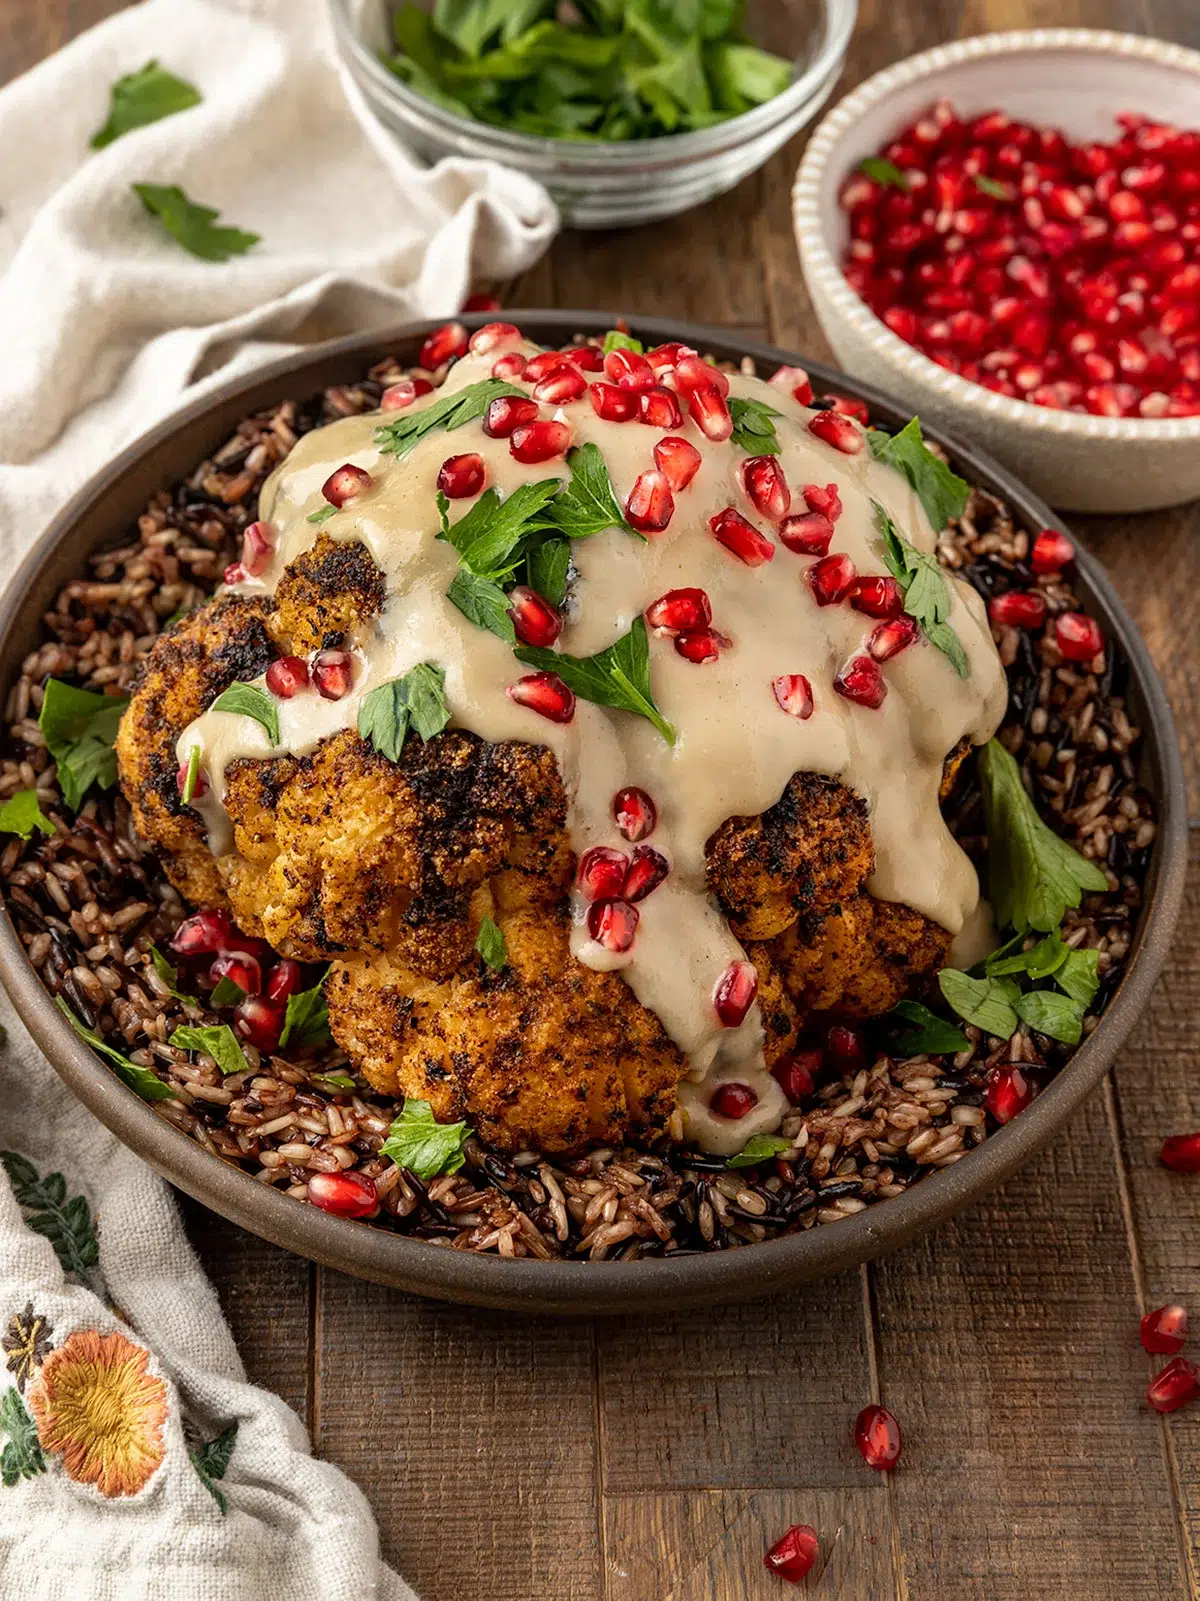 A vegan holiday recipe of roasted cauliflower with pomegranate sauce beautifully plated.